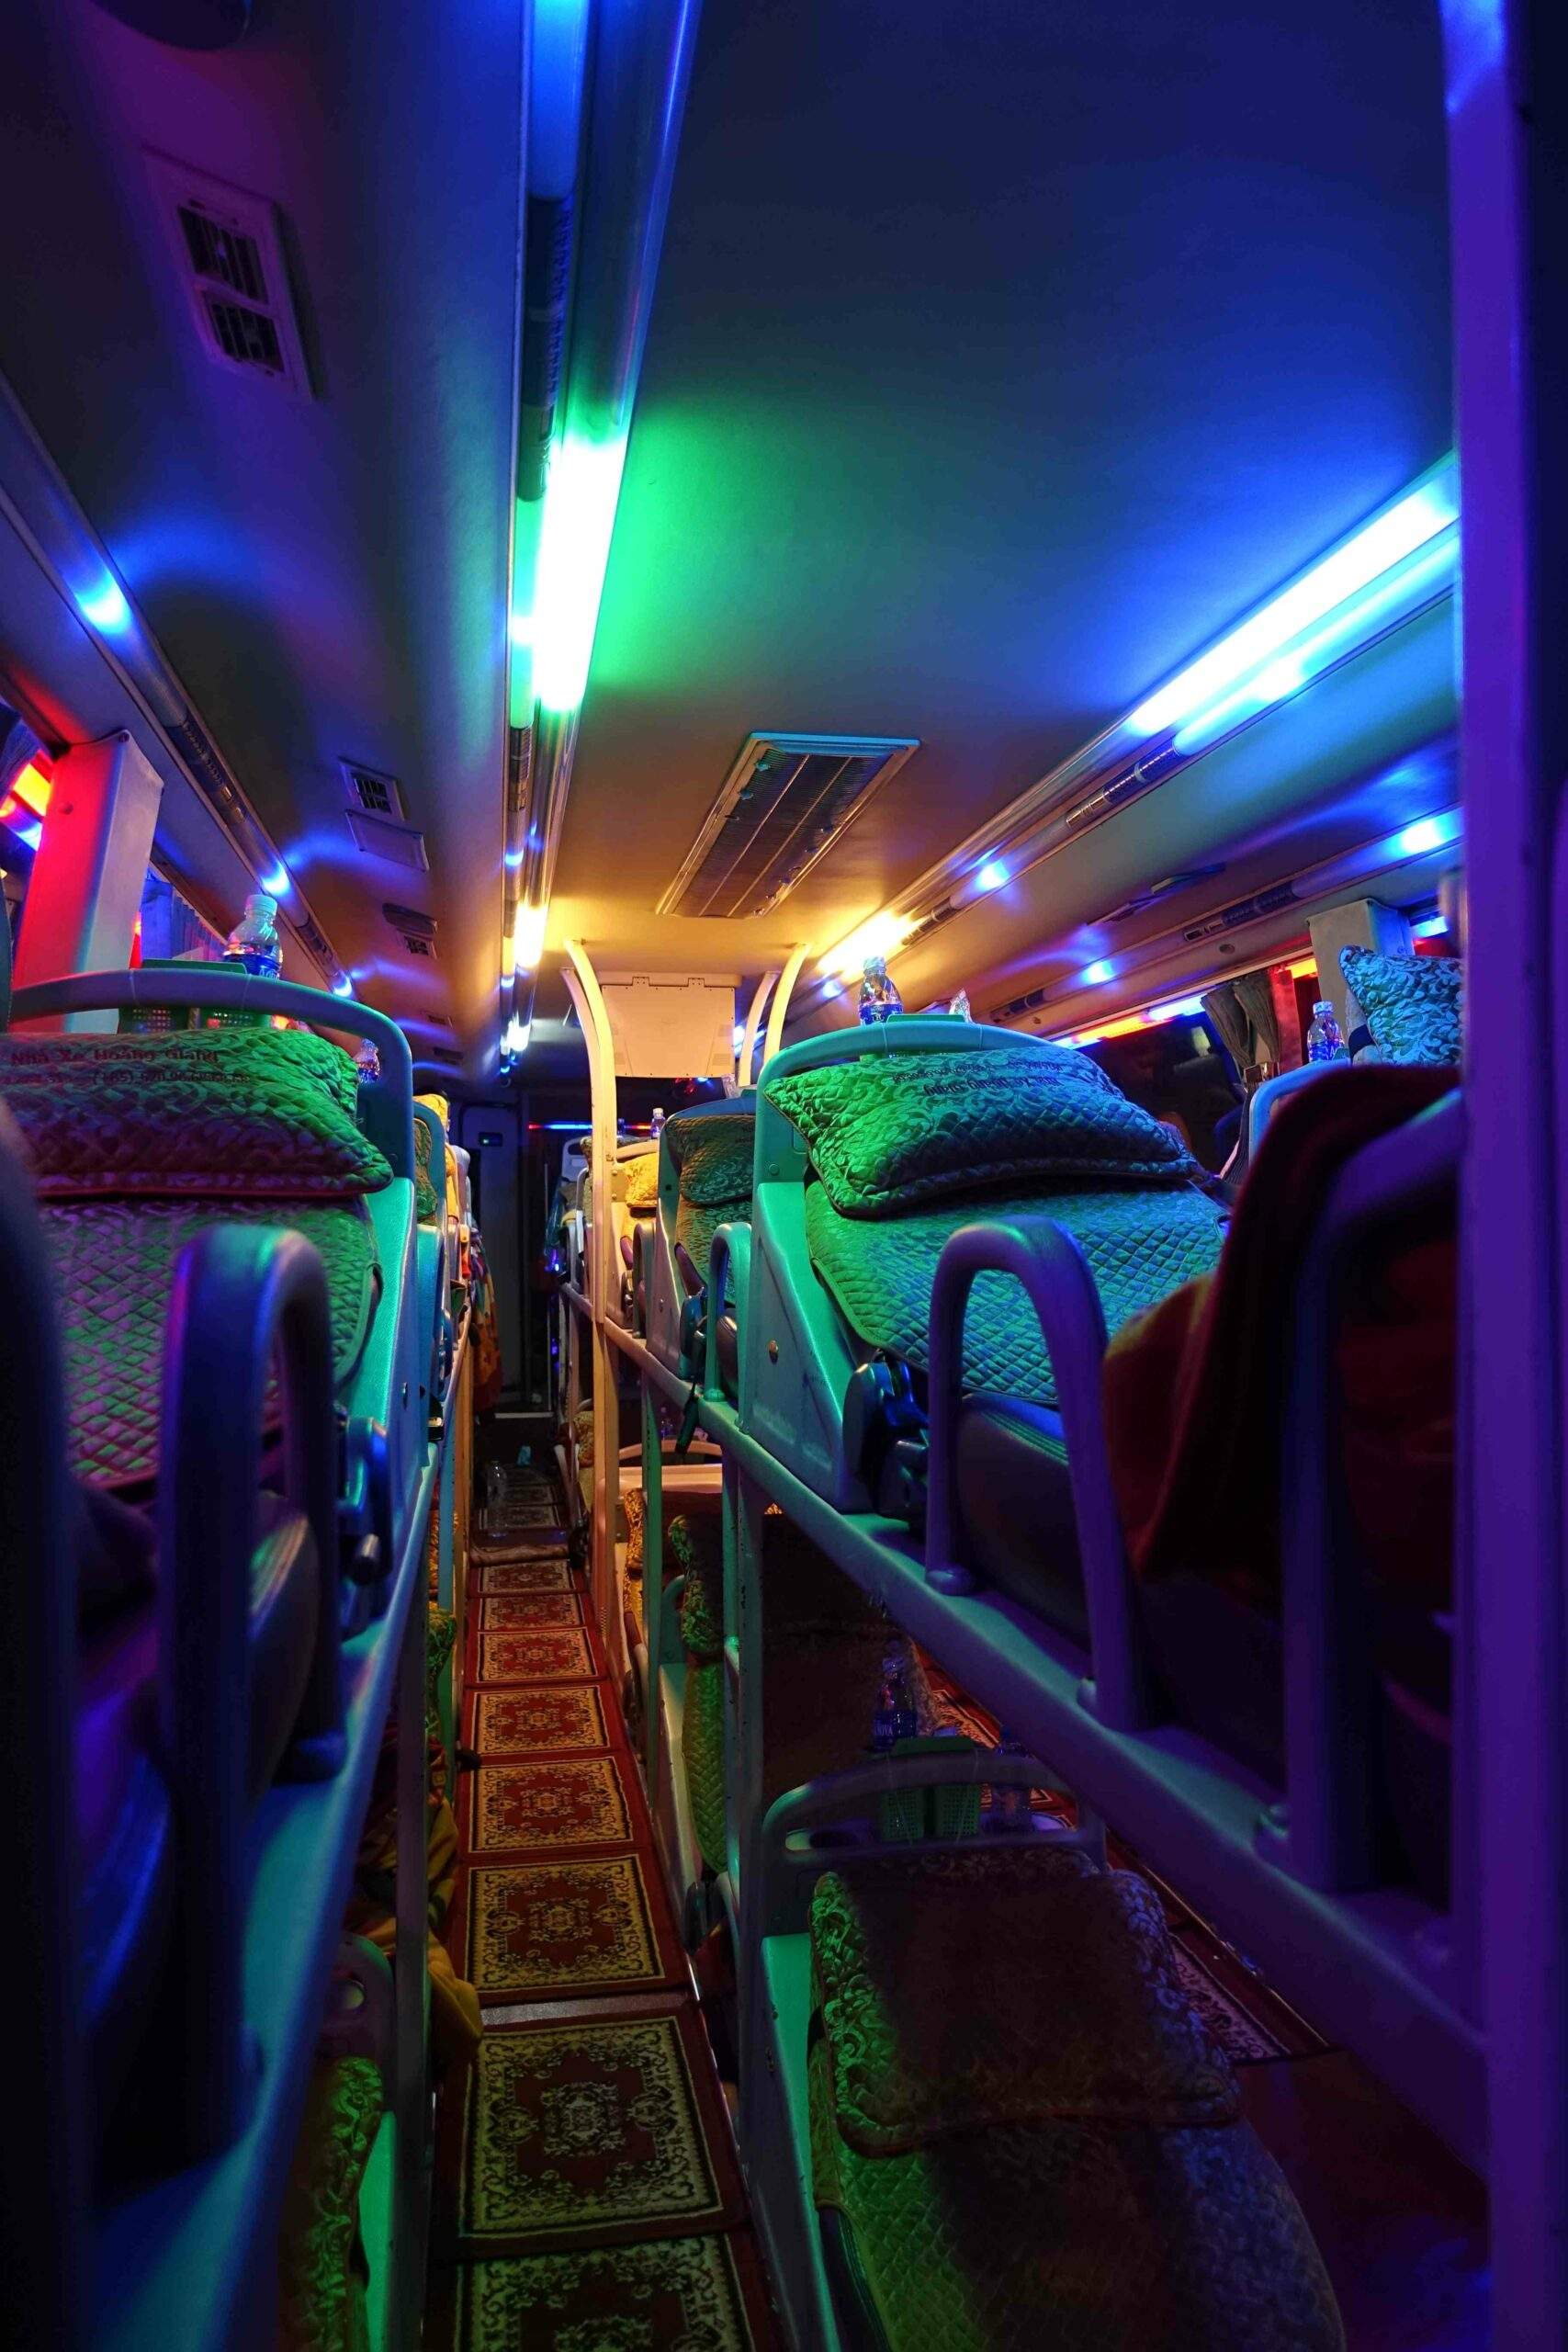 24 Hours On A Bus: Journey to Vietnam